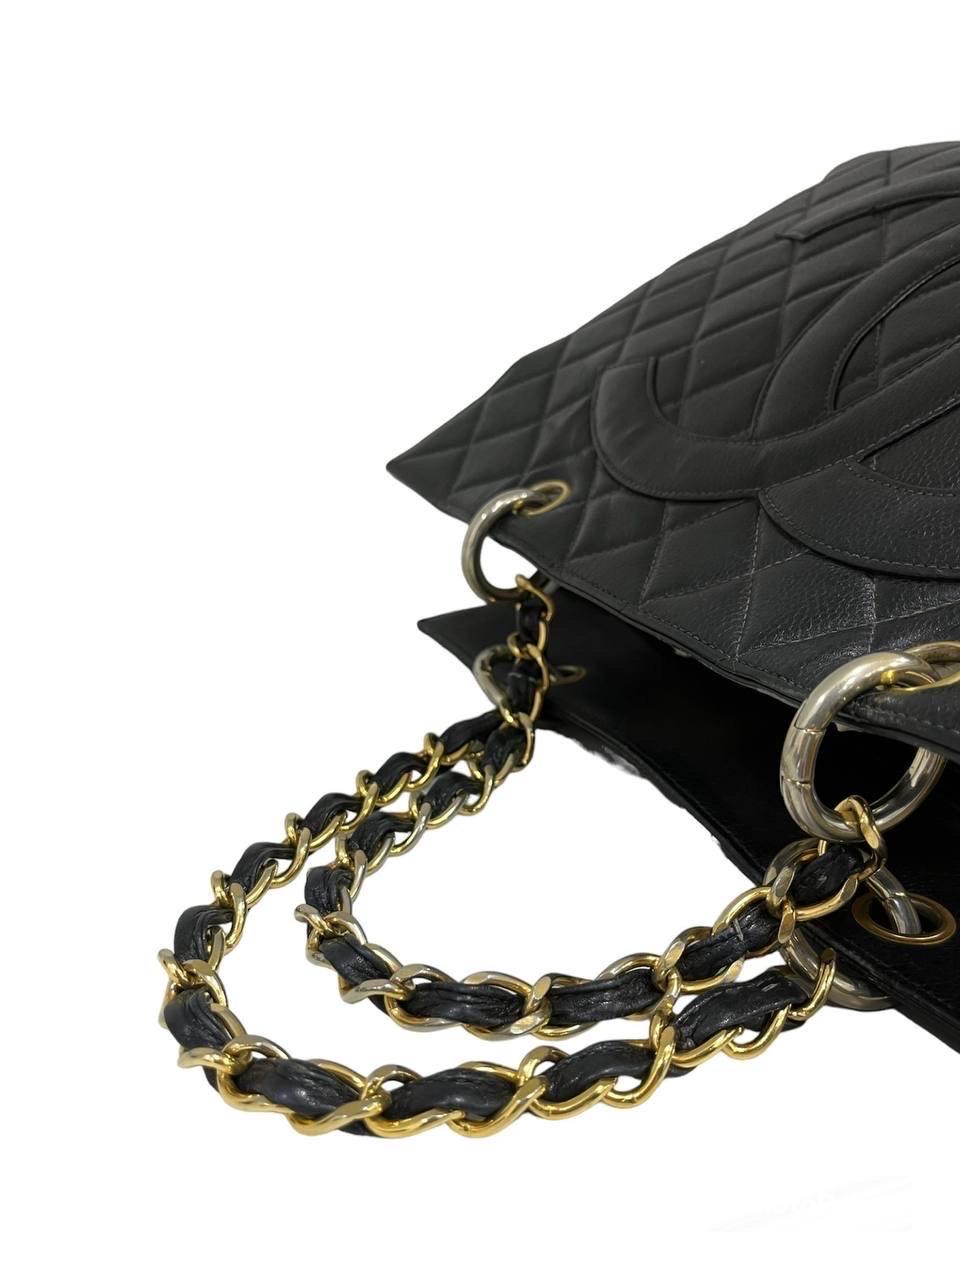 1990 Chanel GST Grand Shopping Tote Black Caviar Leather Top Handle Bag For Sale 3